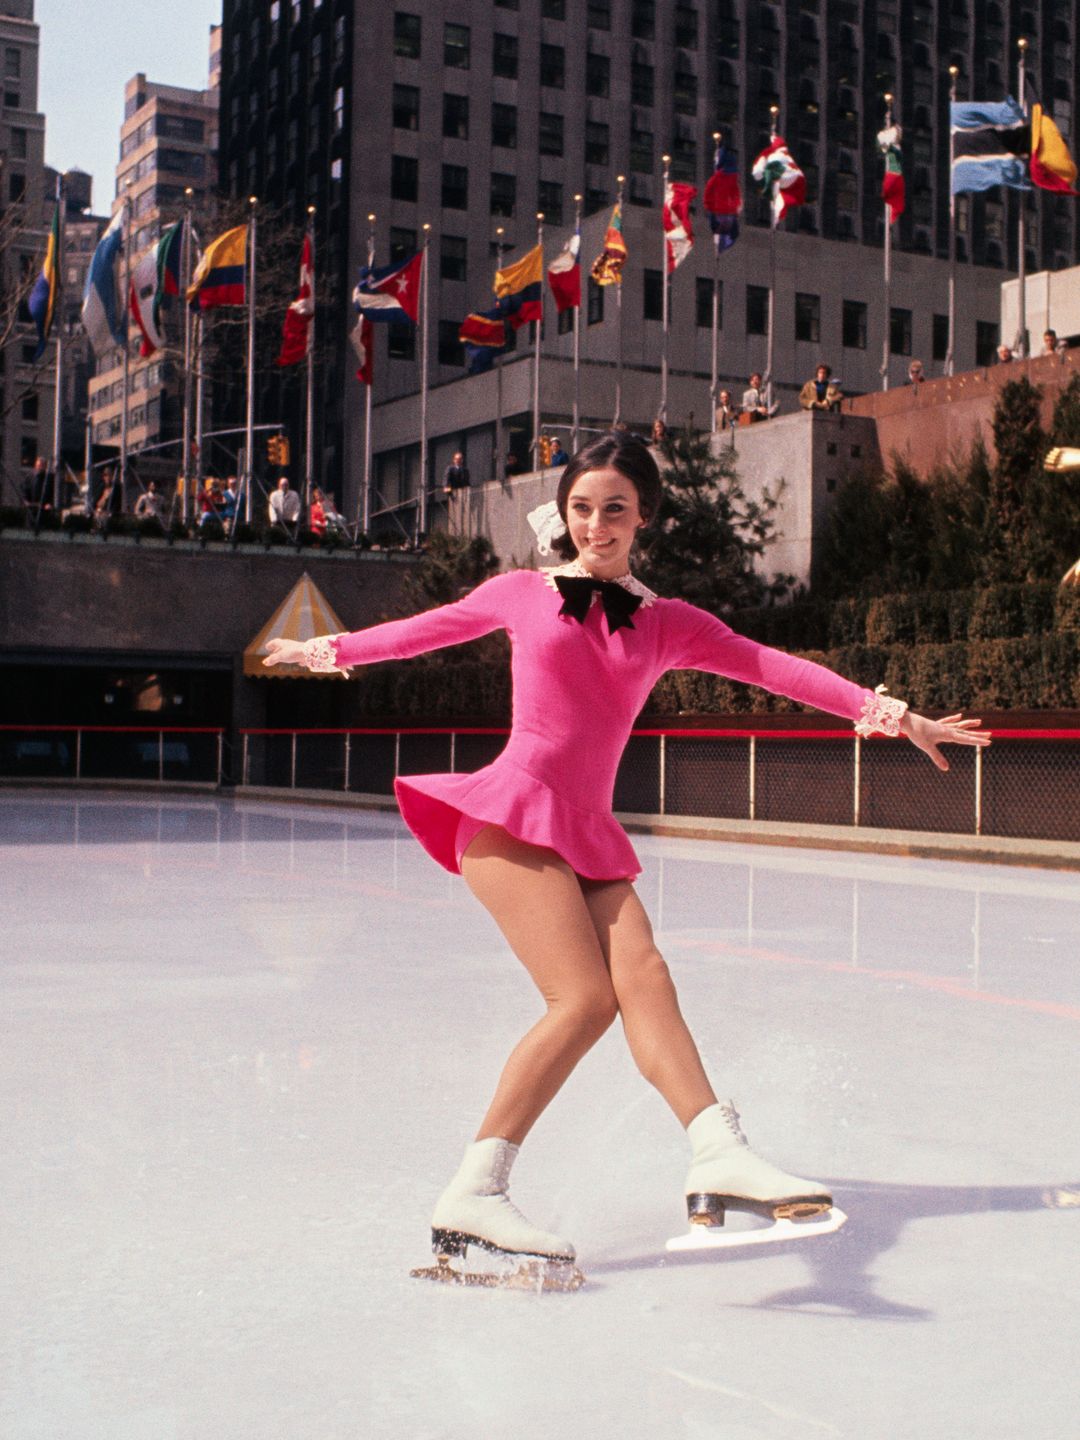 Peggy Fleming winning a Gold Medal at the 1968 Winter Olympics in New York April 10th, 1968